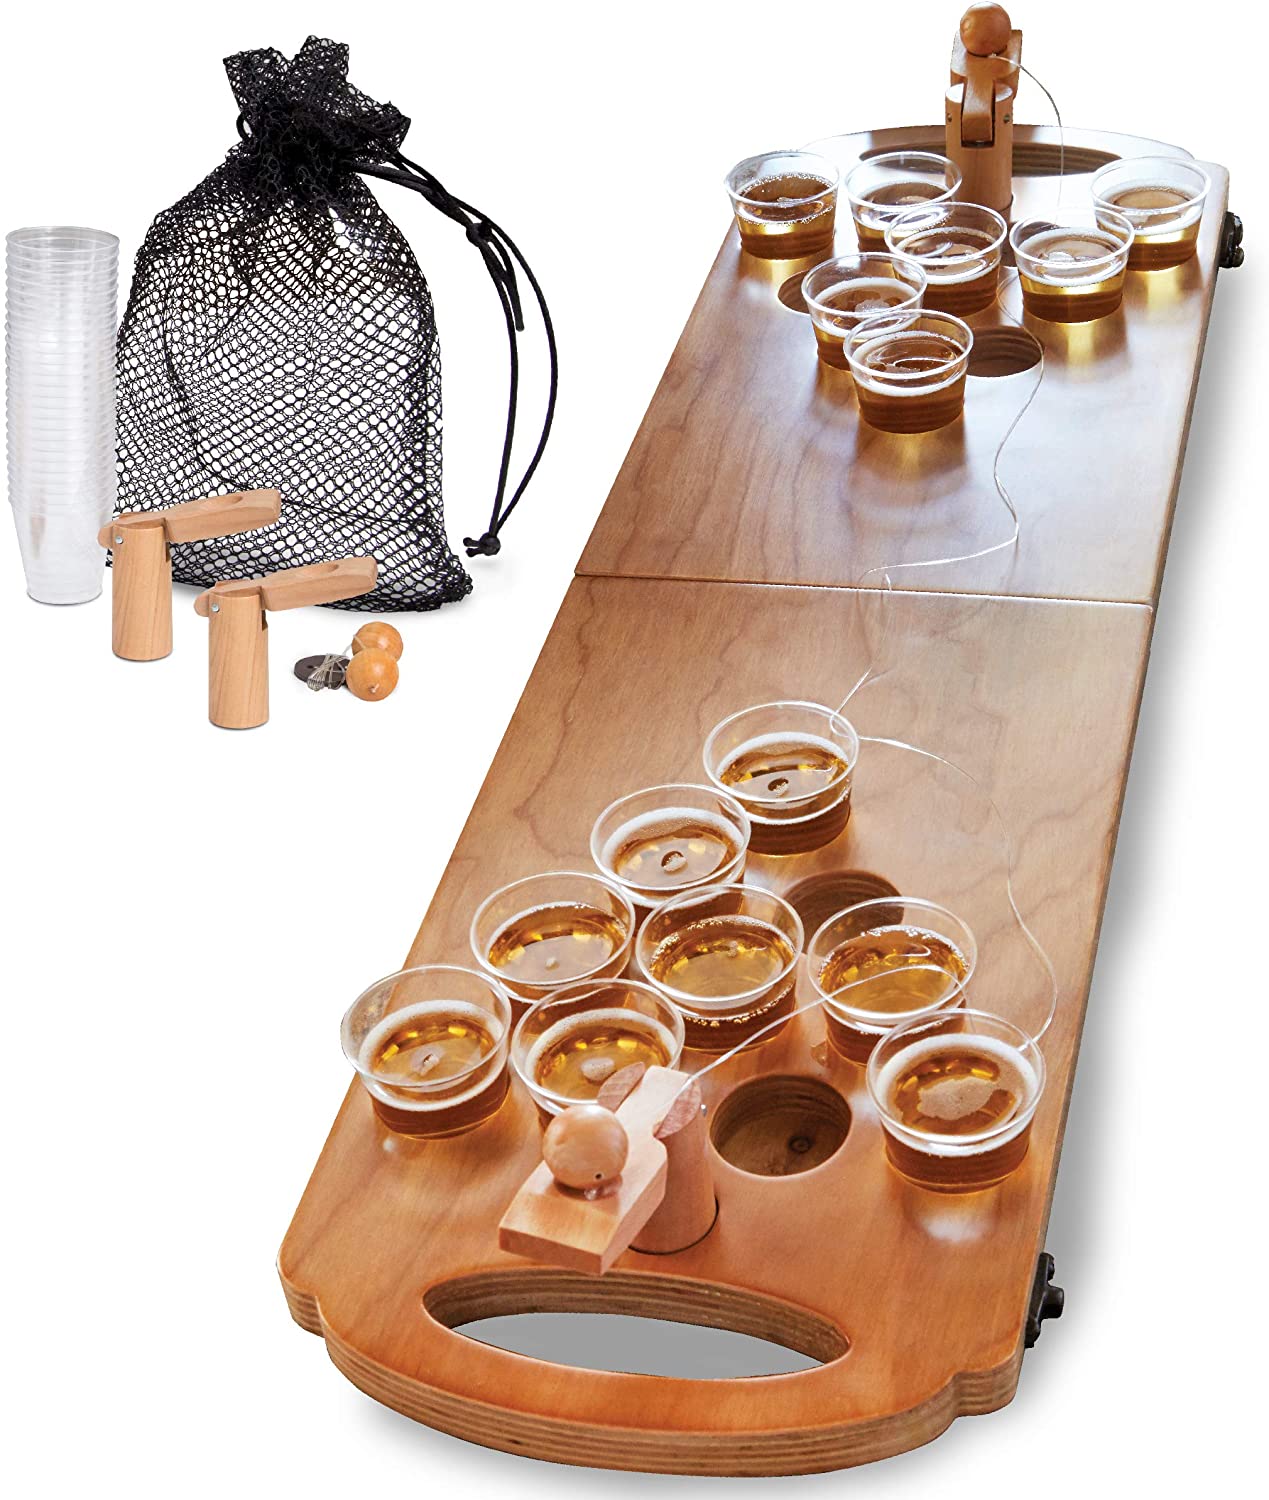 Mini Beer Pong Tabletop Set with Table, Cups, Balls & Carrying Case